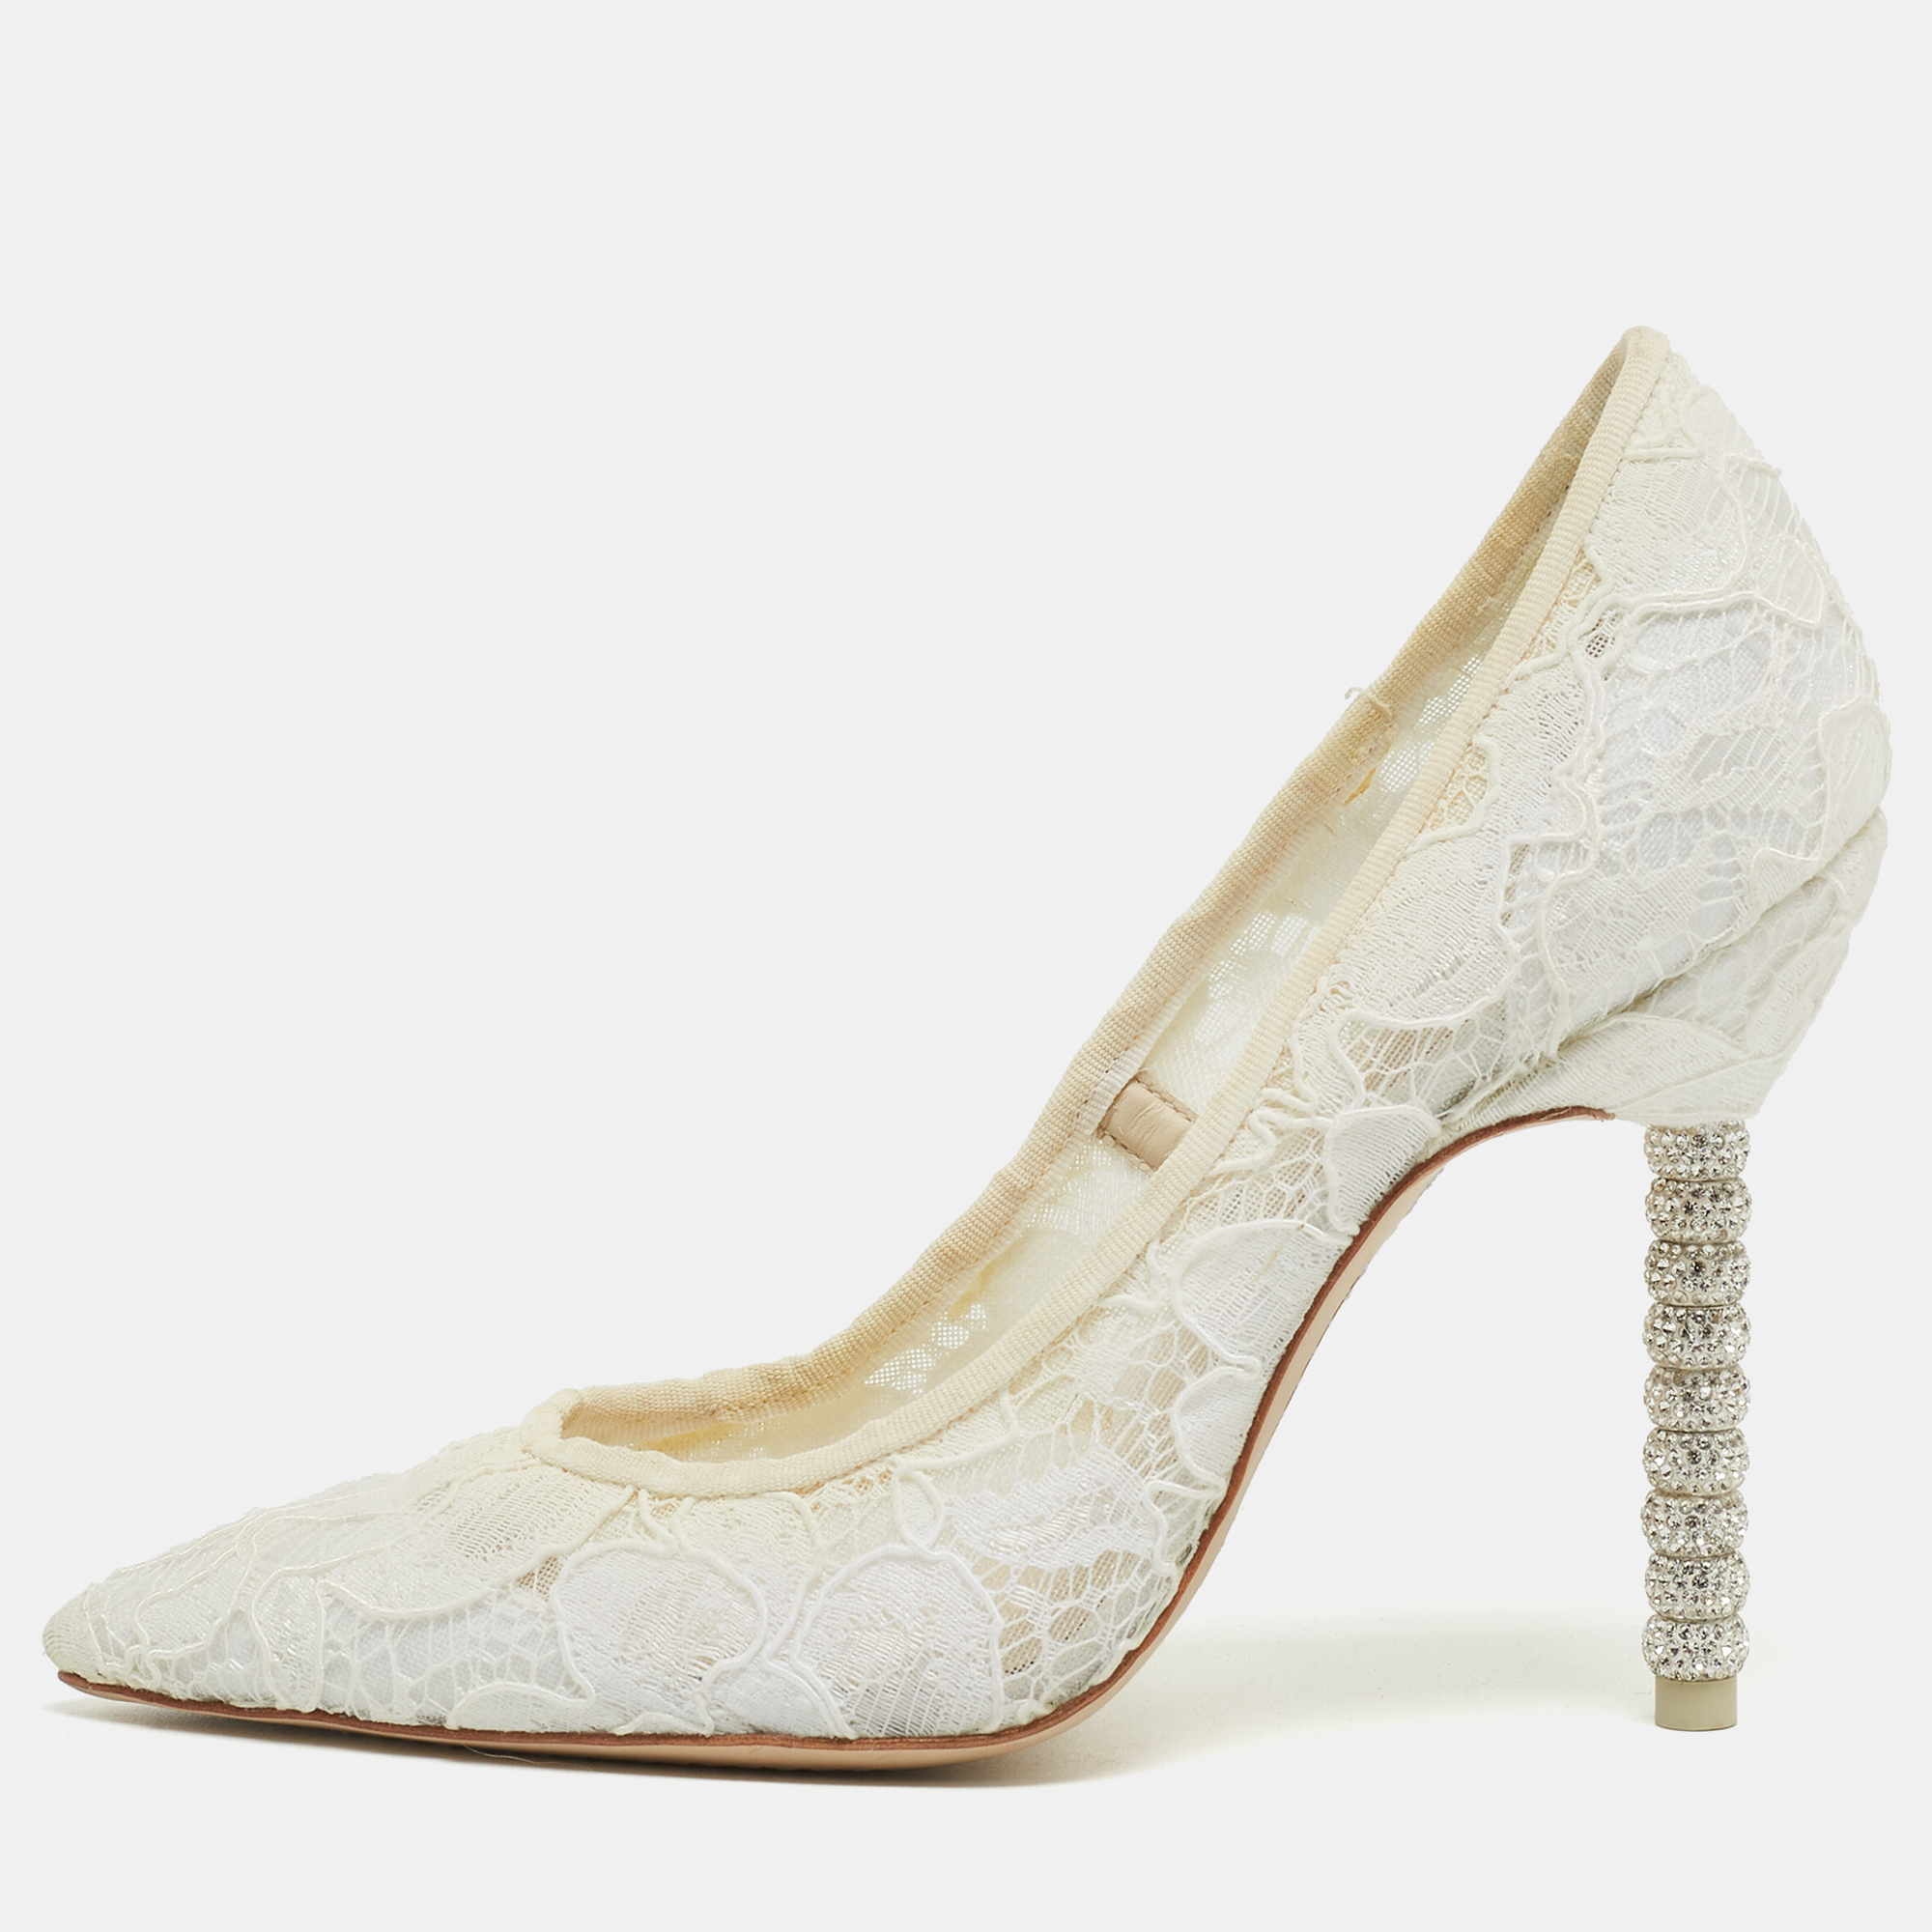 Pre-owned Sophia Webster White Lace Coco Crystal Pumps Size 36